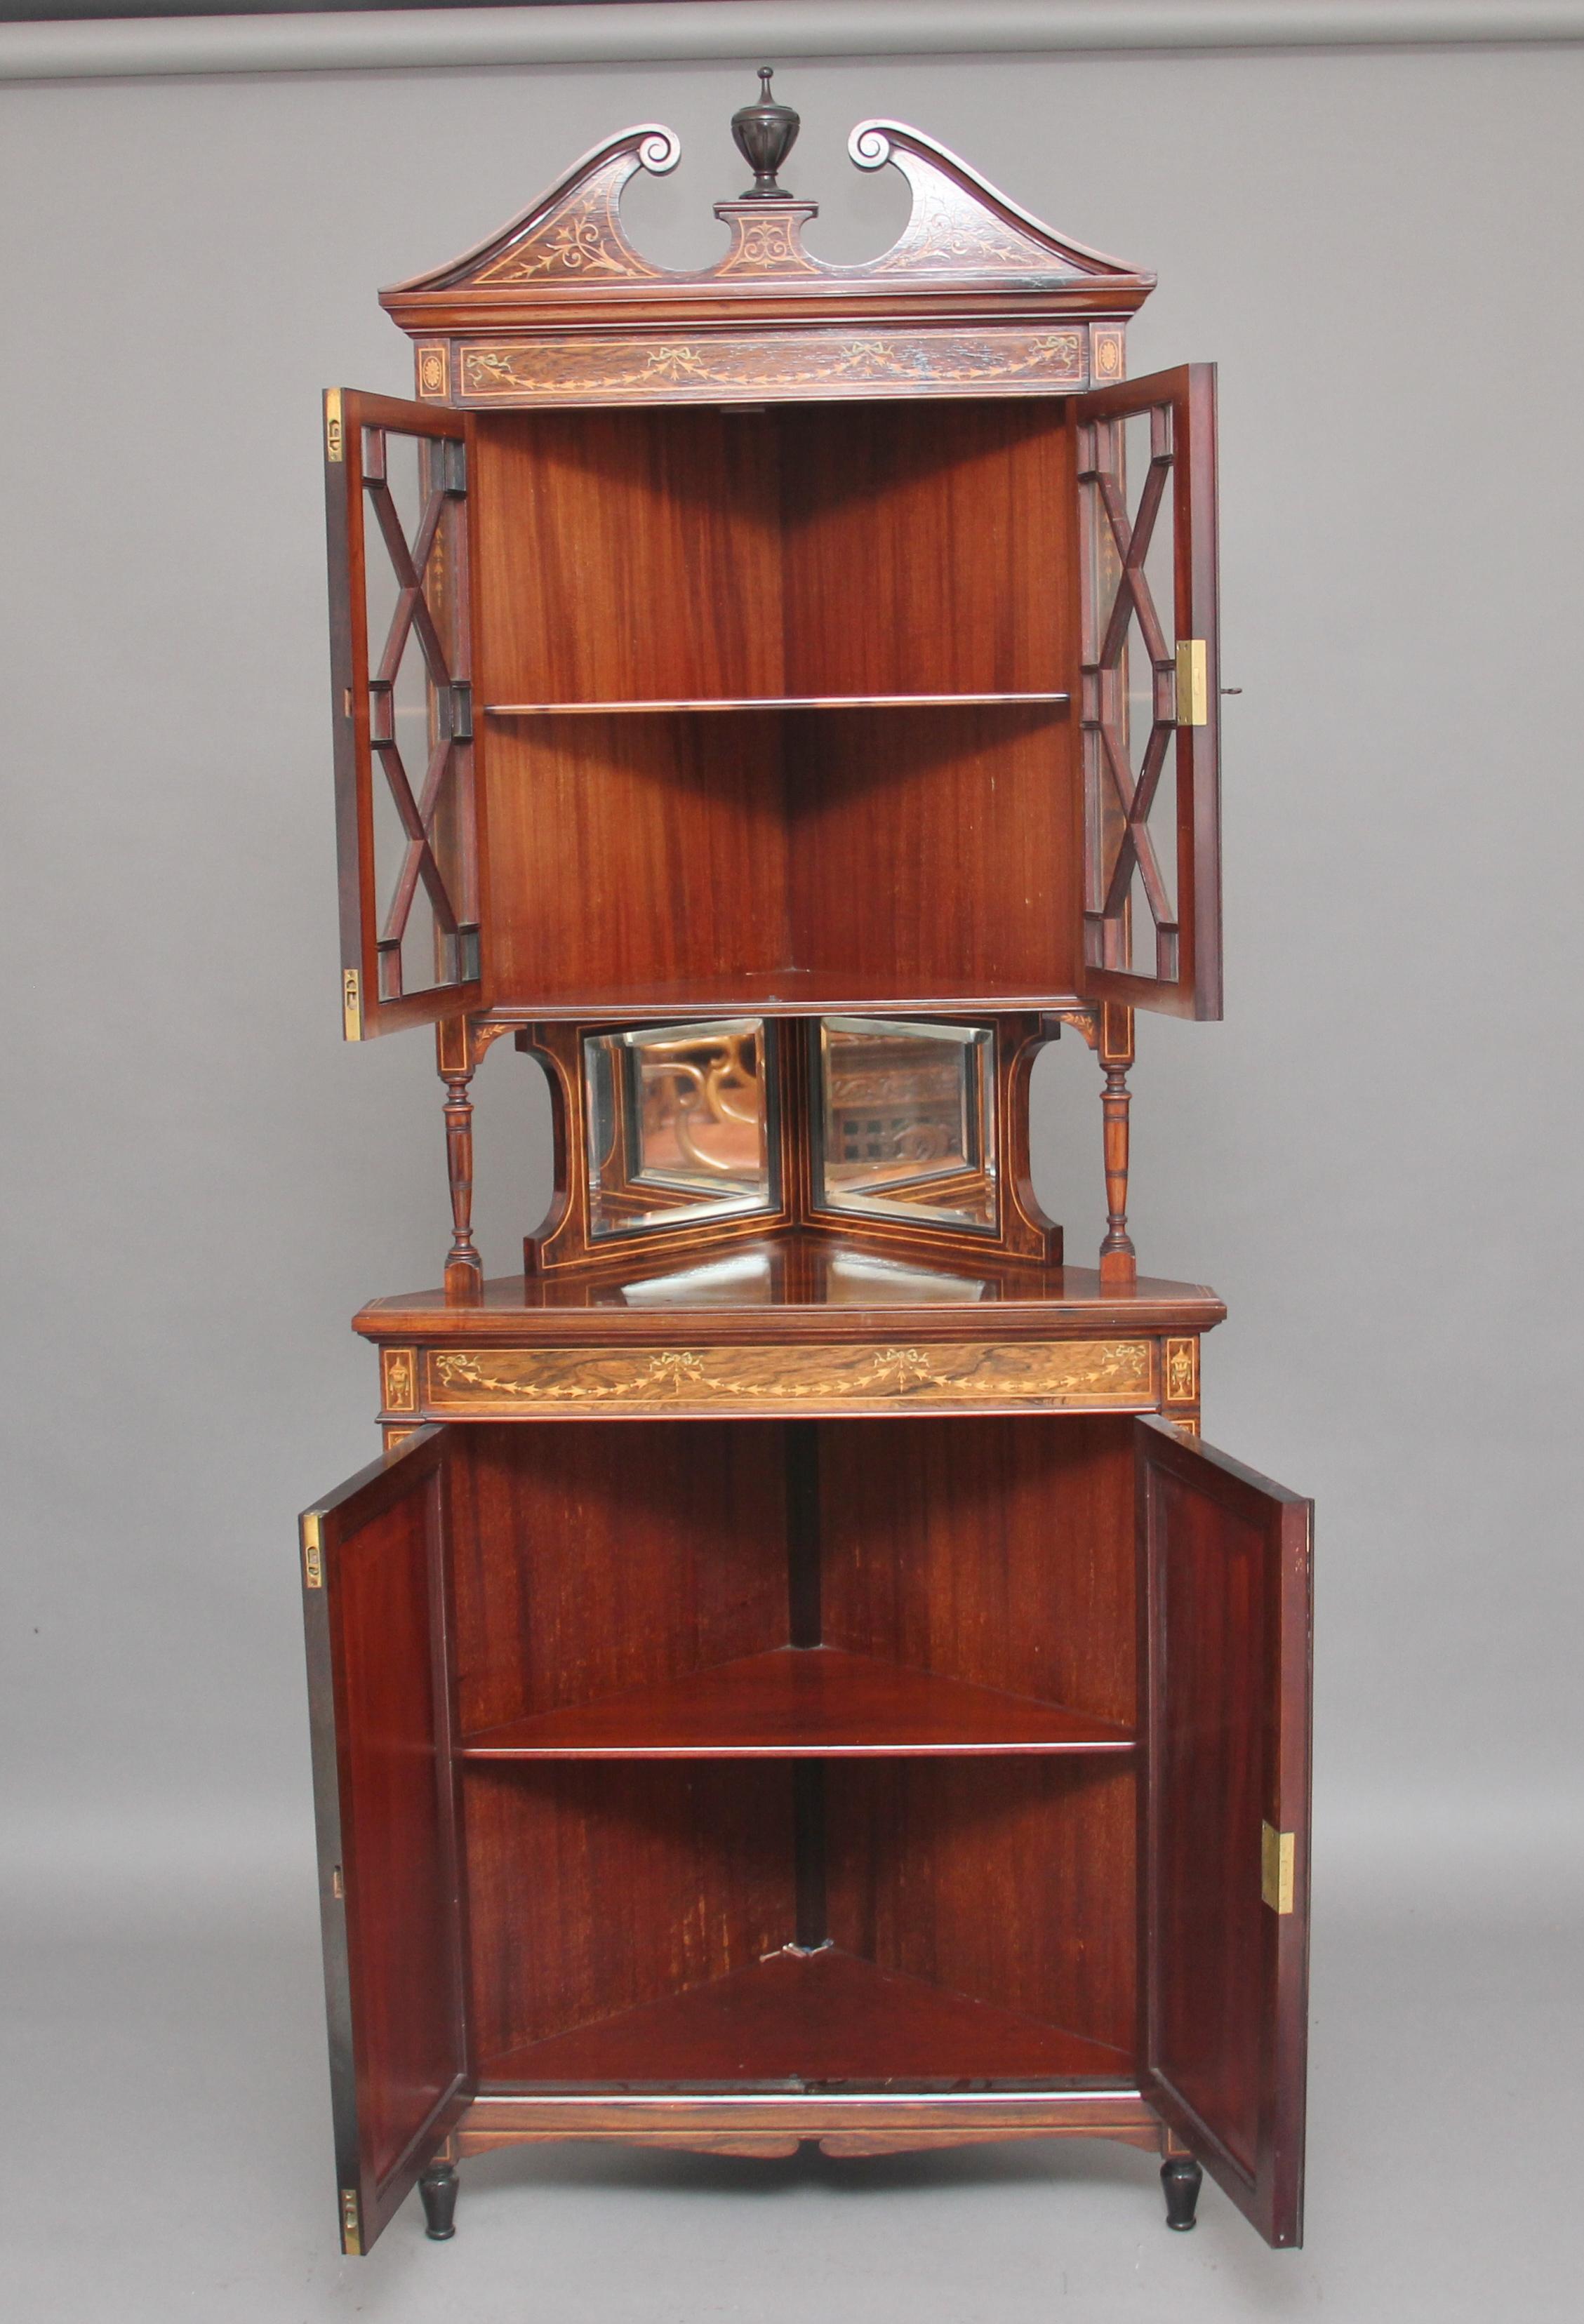 19th century inlaid rosewood corner cabinet by “Edwards & Roberts”, the cabinet is in two pieces, the top piece having an inlaid swan neck pediment with a central turned finial, with two astrigal glazed doors decorated with boxwood lines and floral